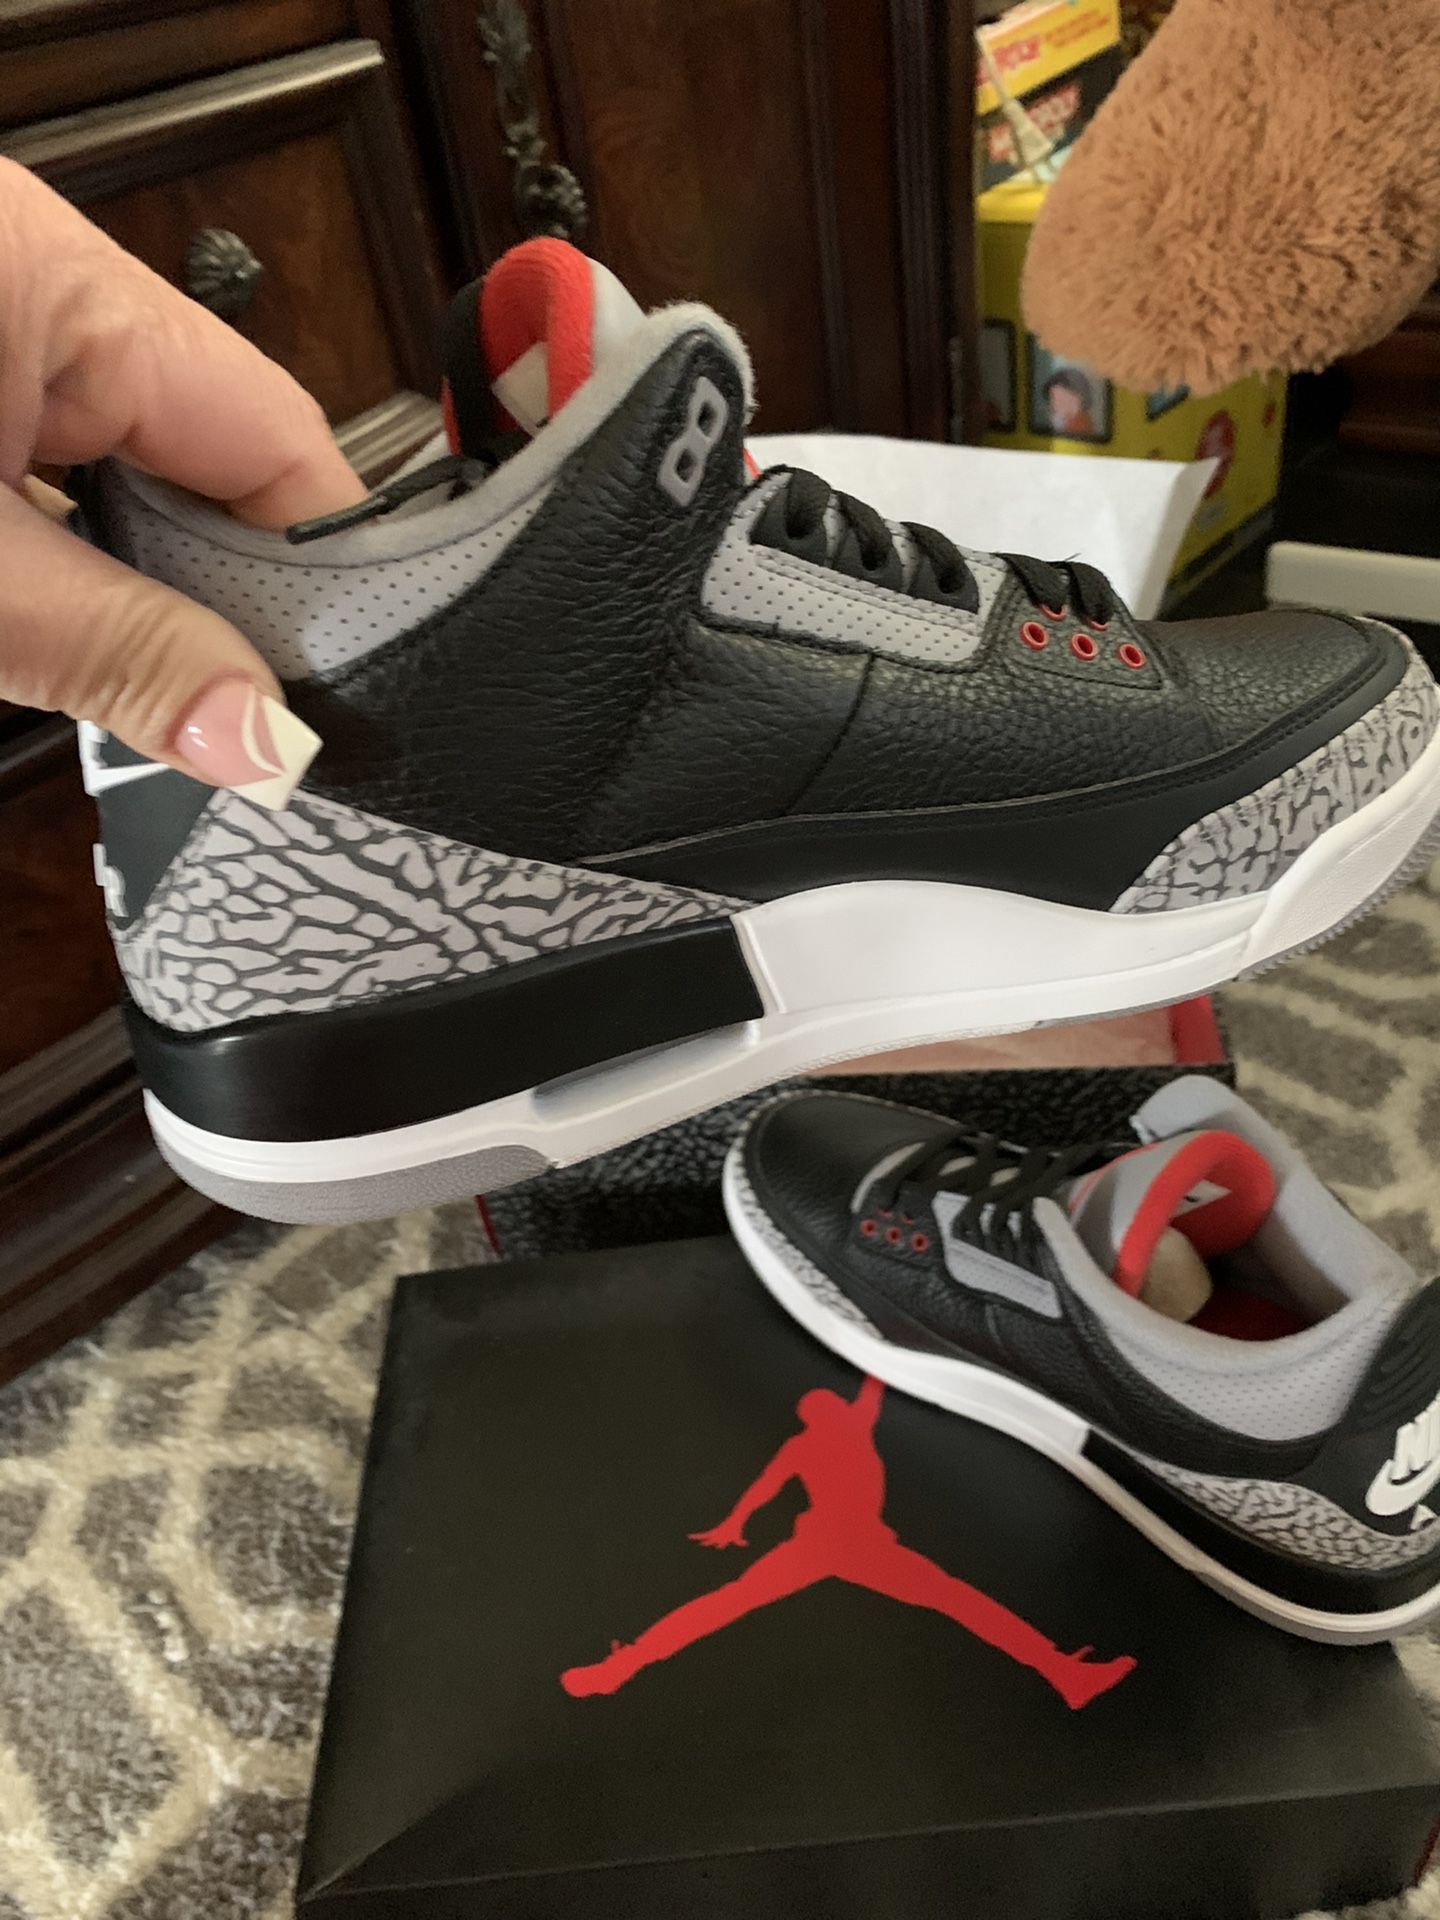 Air Jordan 3 Retro OG men size 10. Please serious buyers only and no trade in. Thank you.